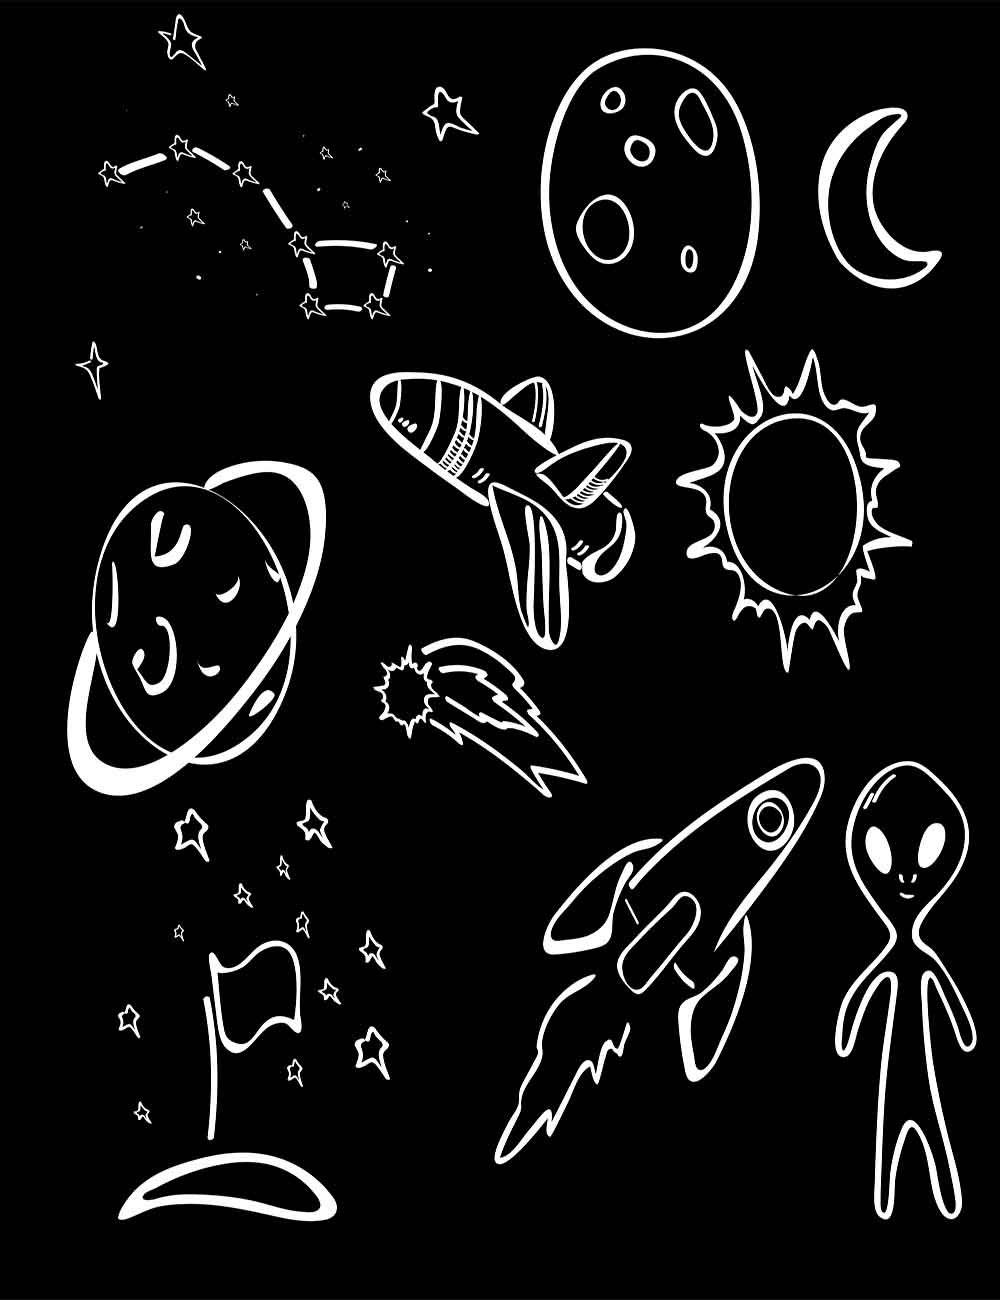 Painted Rocket Star And Alien On Chalkboard For Baby Photography Backdrop Shopbackdrop